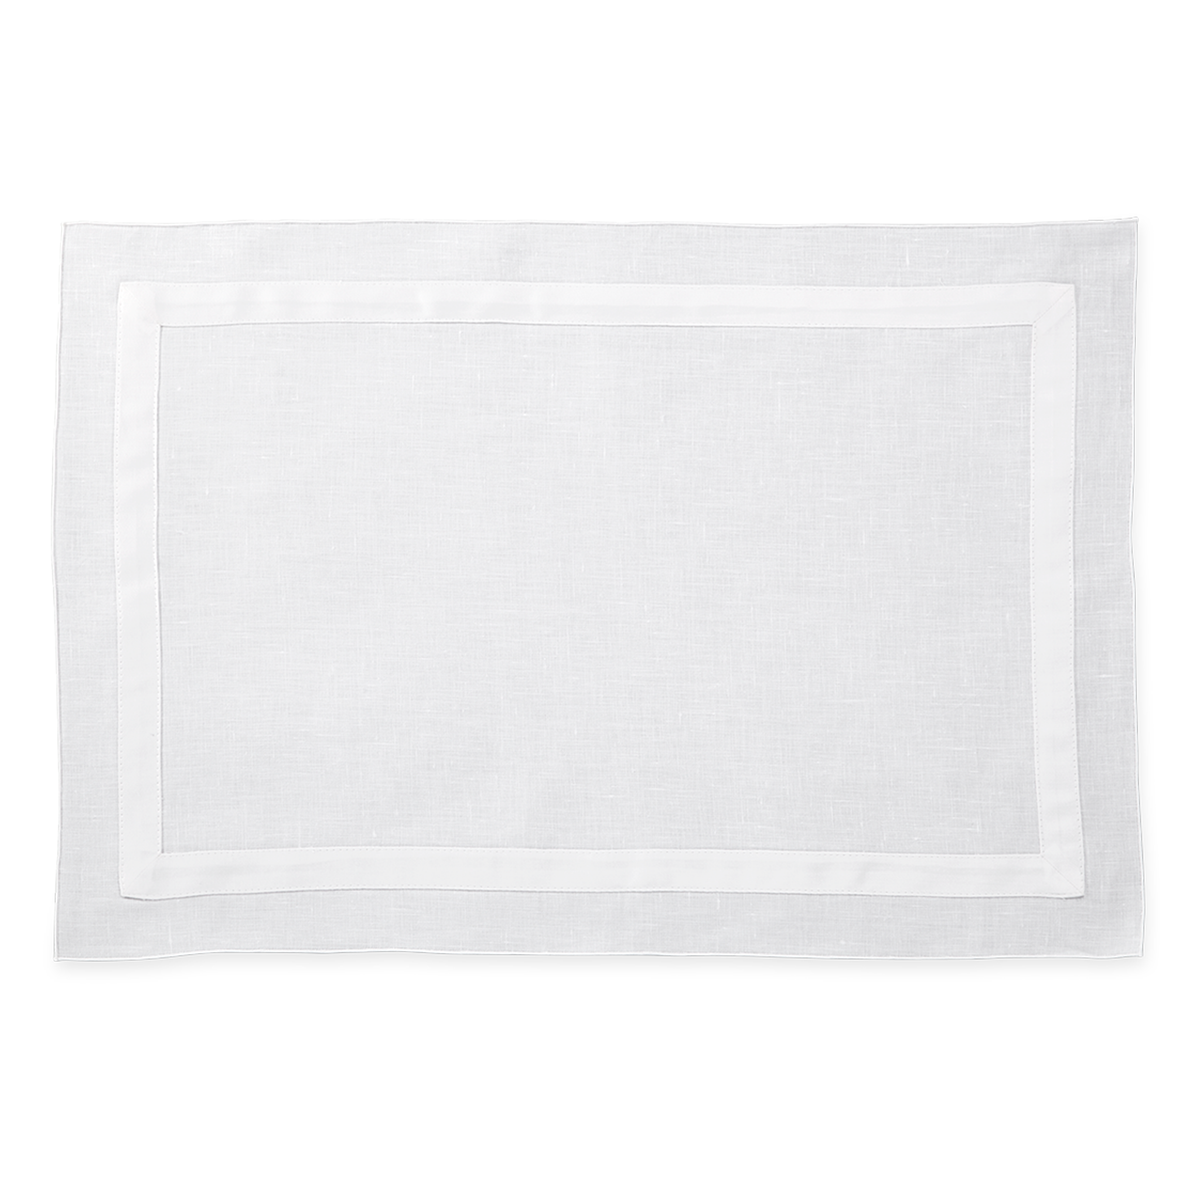 Placemat of Matouk Schumacher Lowell Table Linens in Color White